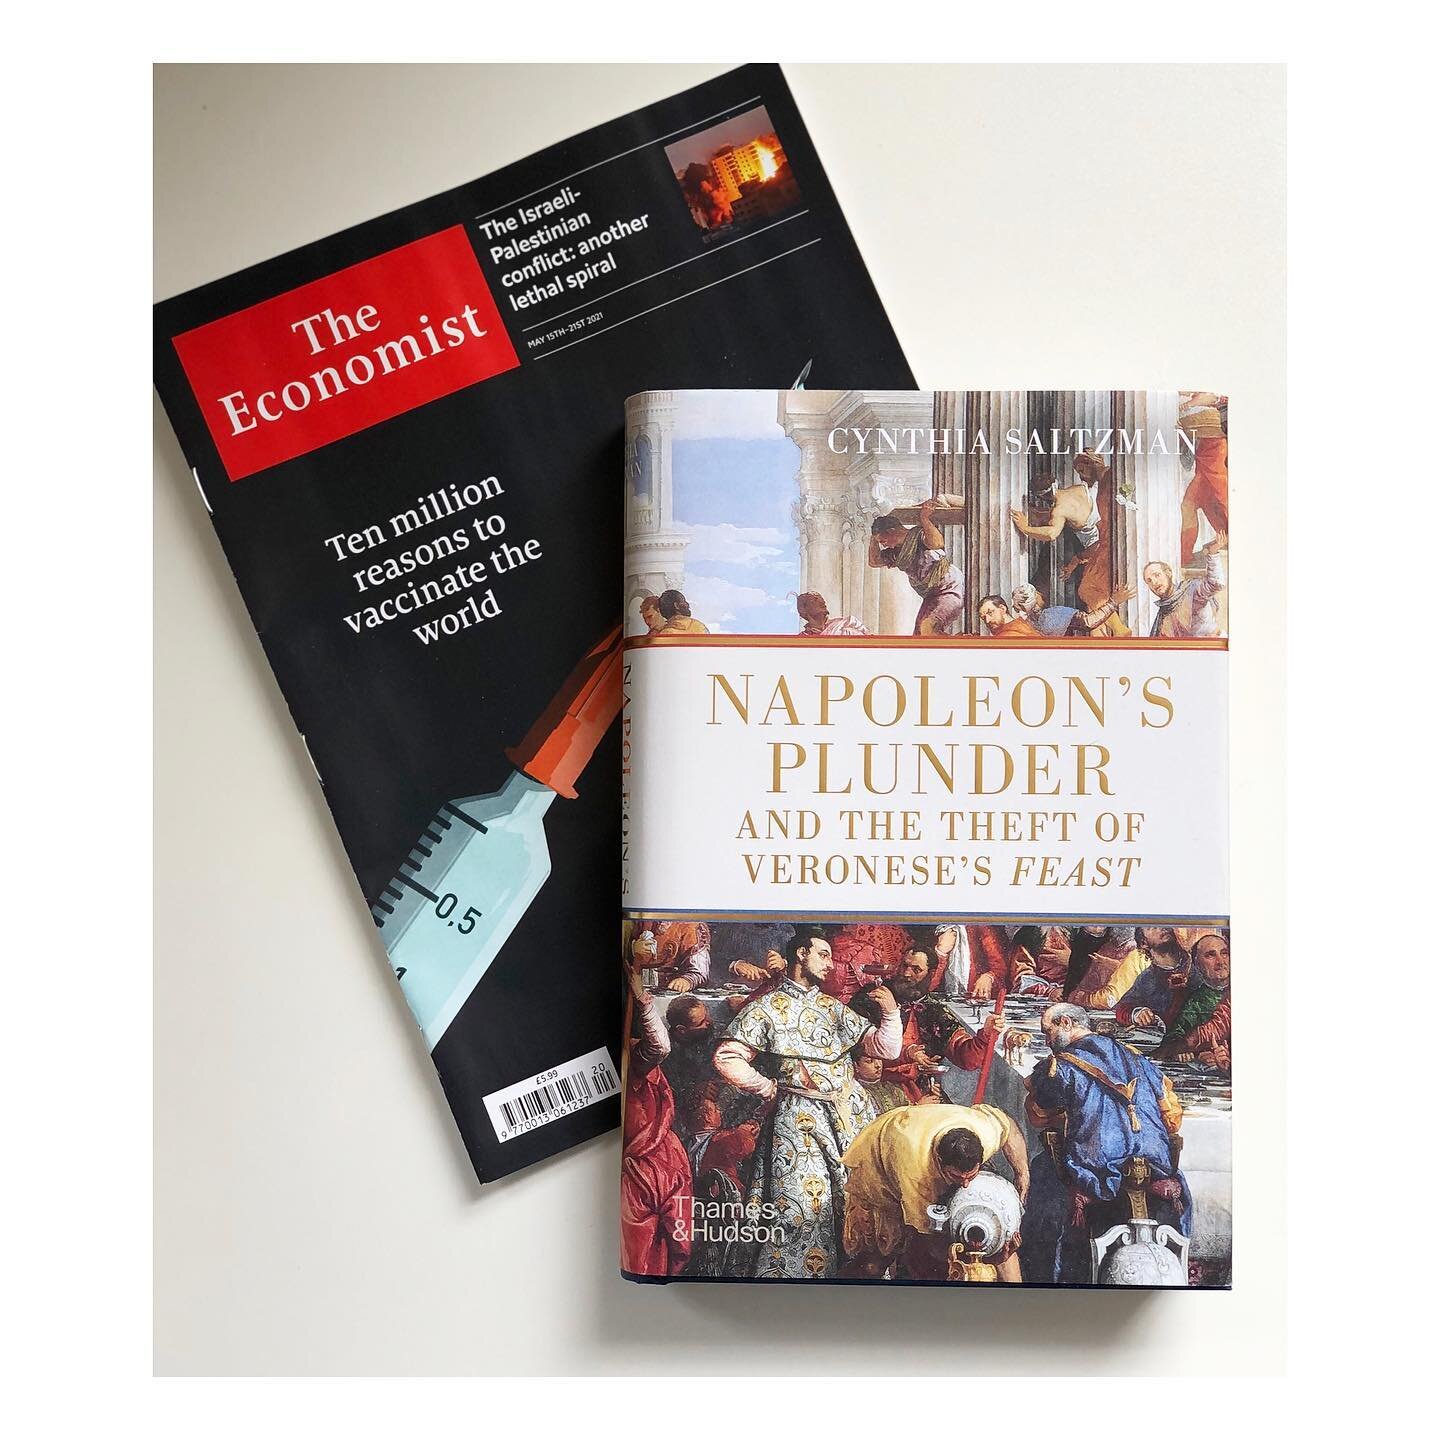 I&rsquo;m in this week&rsquo;s @theeconomist, reviewing a book about Napoleon&rsquo;s art theft in Italy 🖼💰
.
.
.
#mika_ross_southall #writer #studio #theeconomist #culturaljournalist #reviews #Napoleon #art #arttheft #Italy #war #bookreview #books